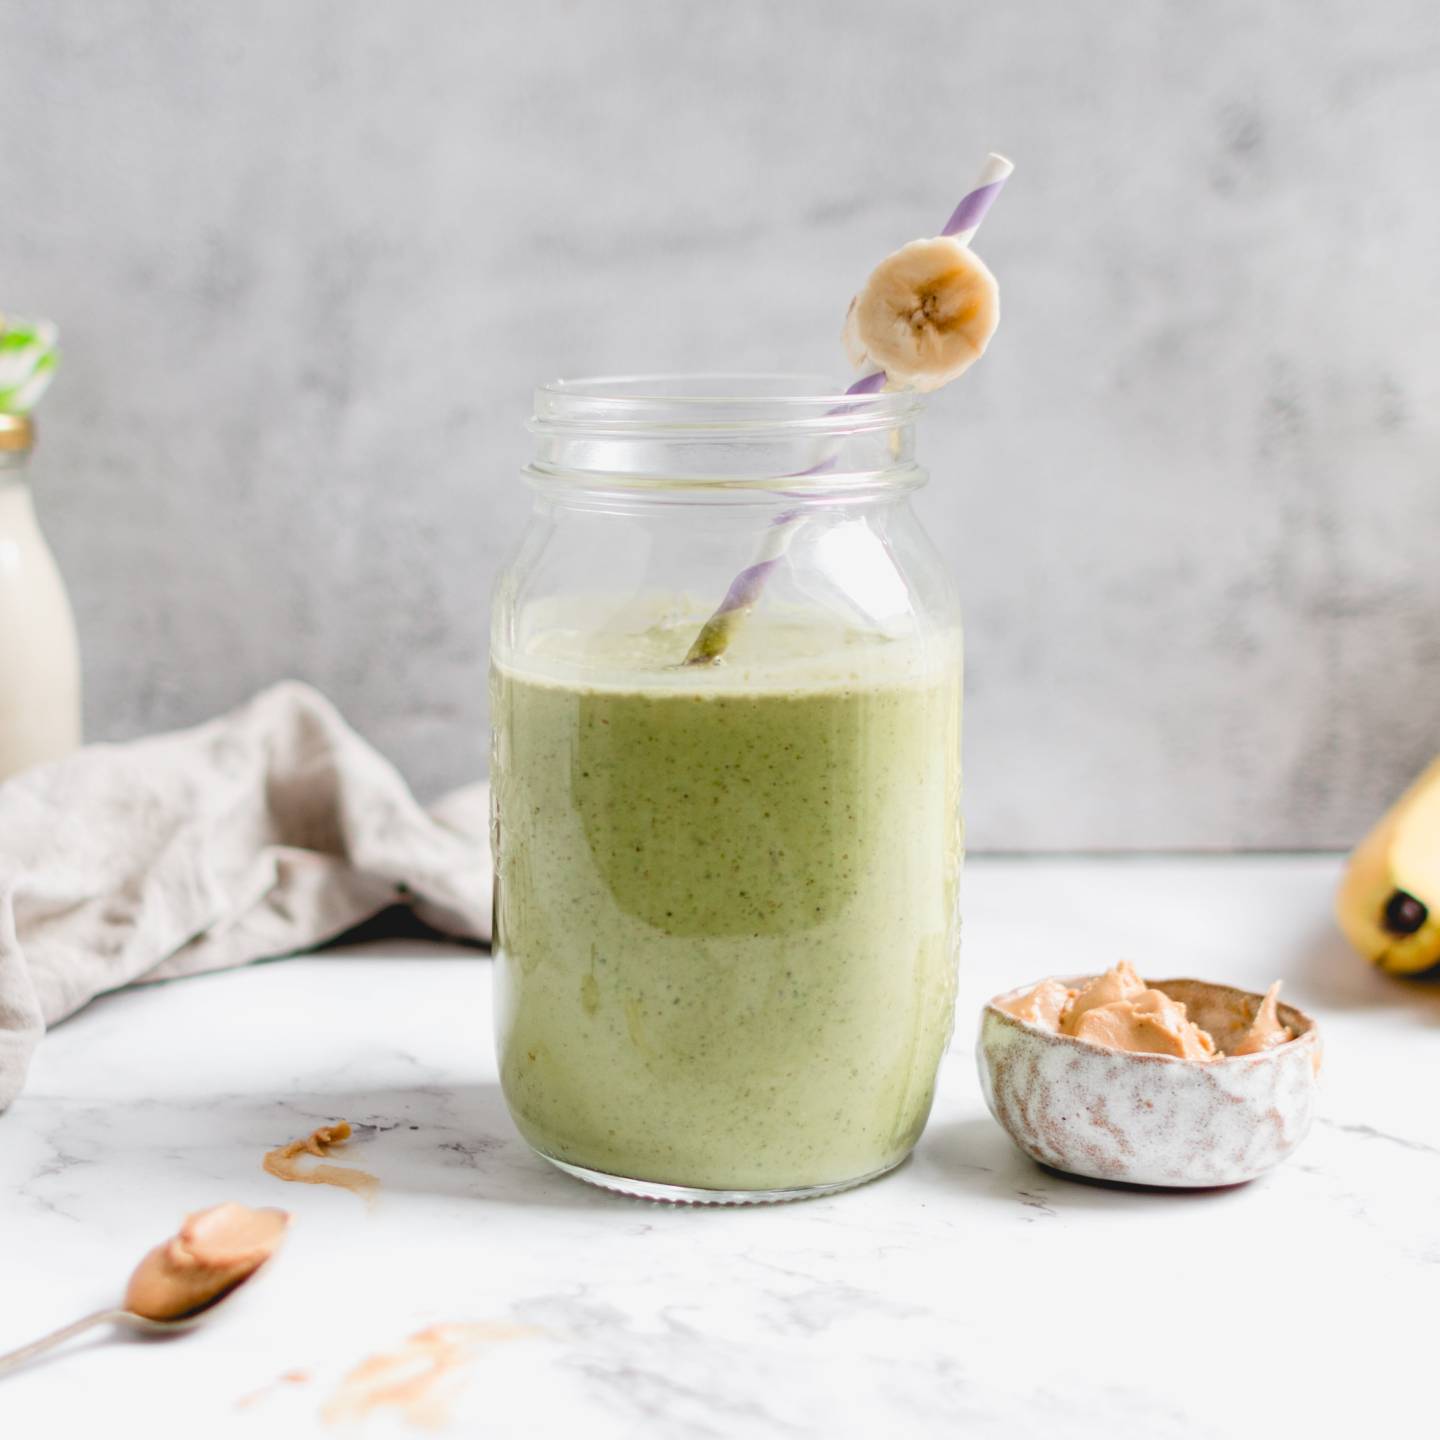 Peanut butter banana green smoothie served in a glass with a slice of banana and a straw.